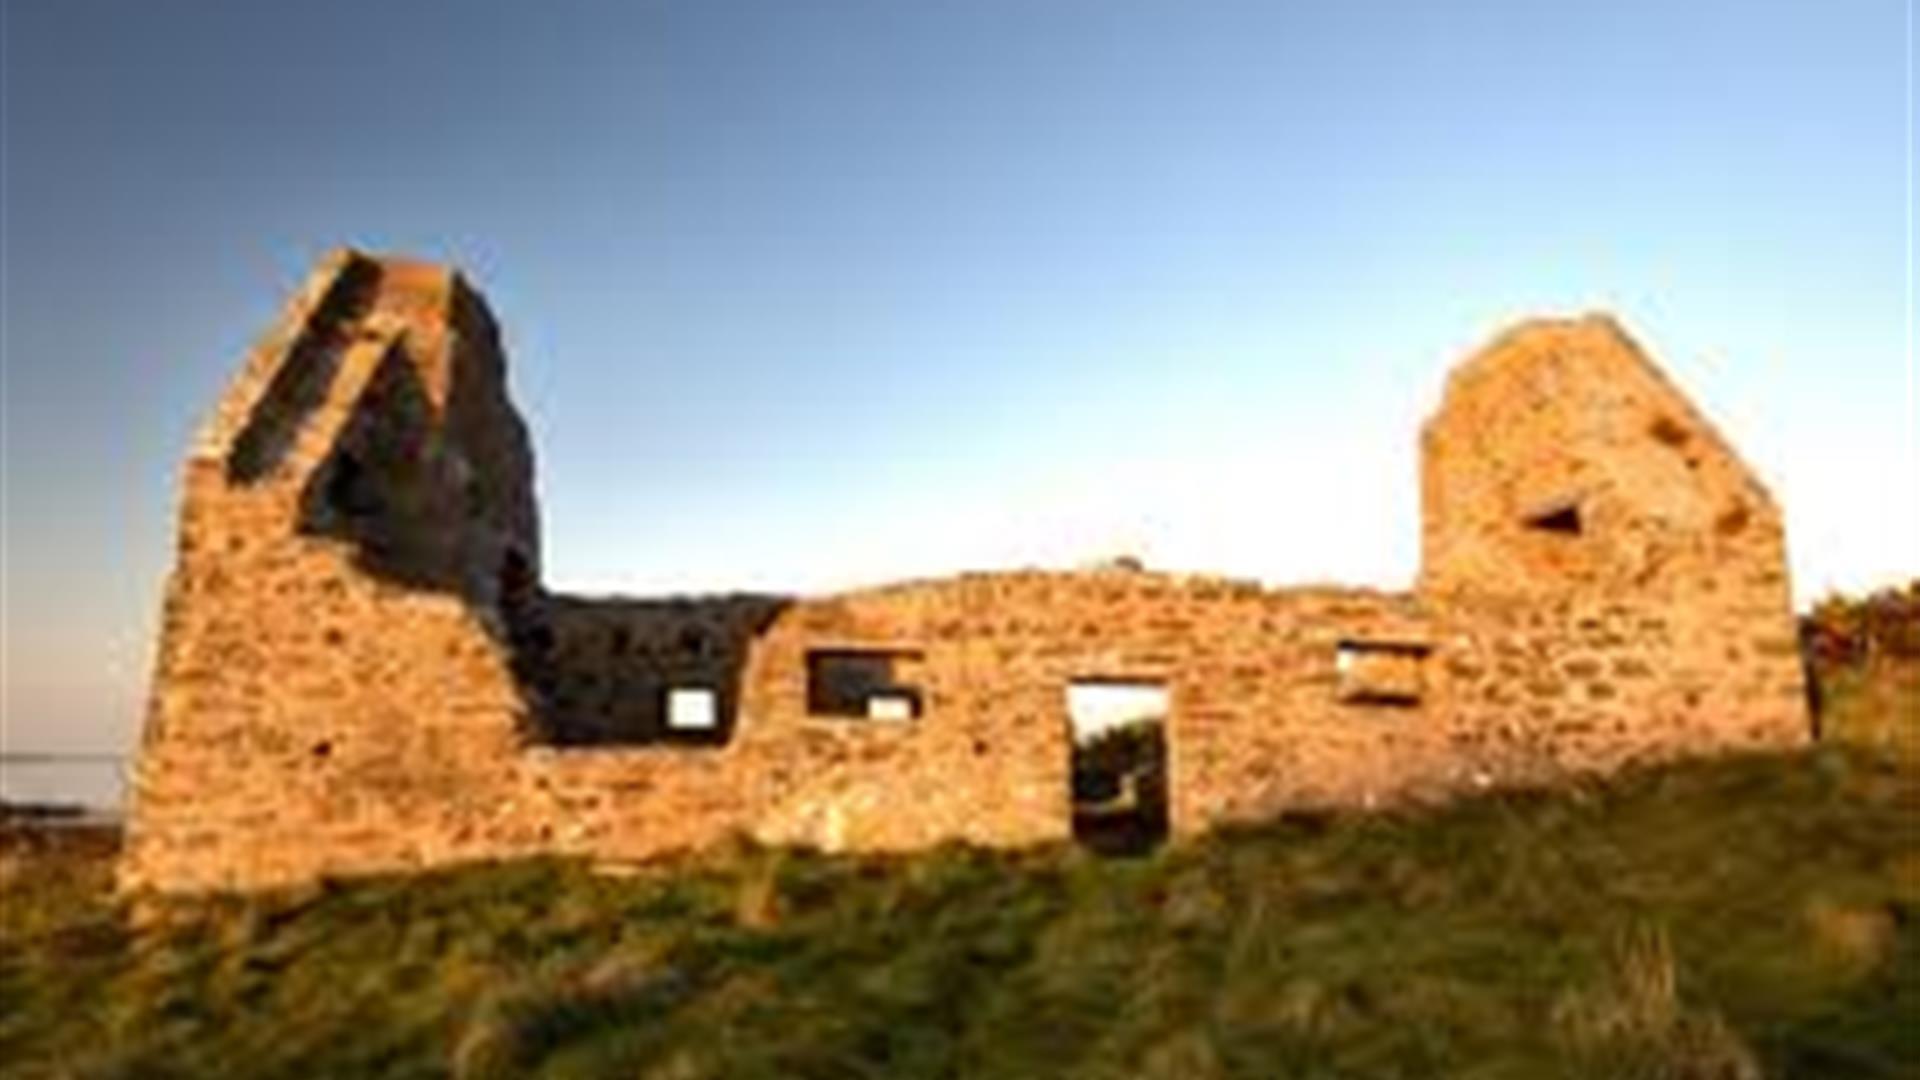 Image of the ruins at sunset with the light of the sun shining onto the remnants of the building